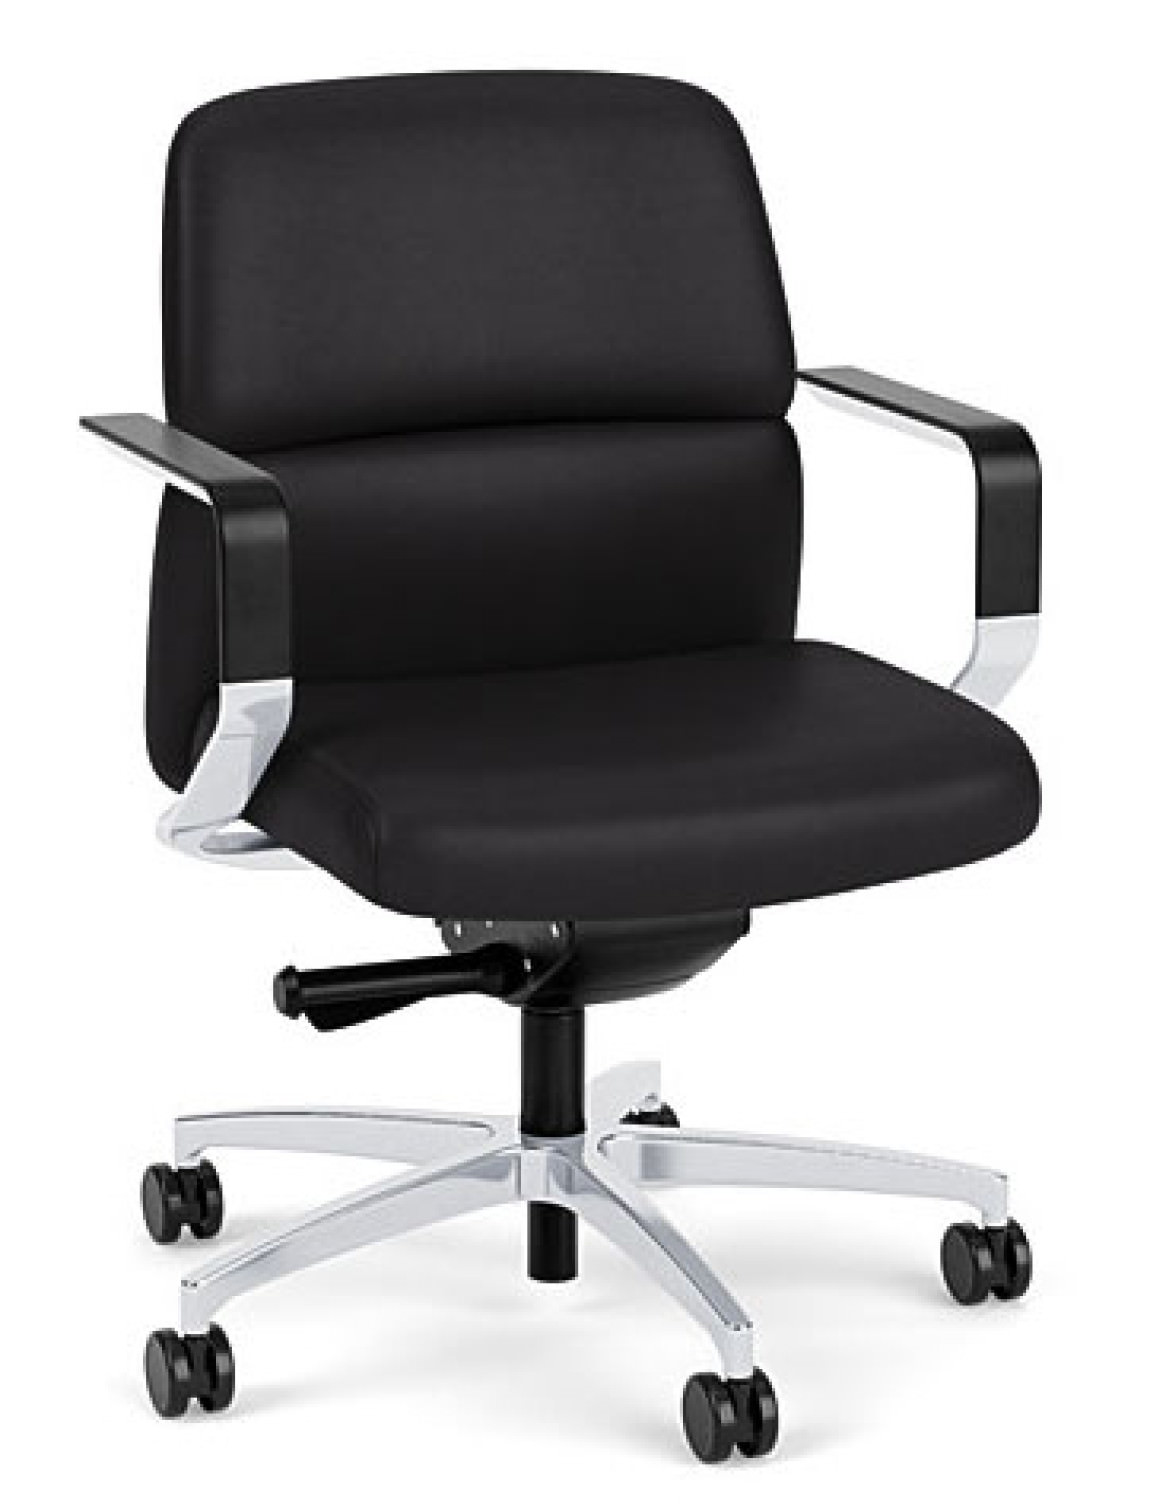 Vinyl Mid Back Conference Room Chair